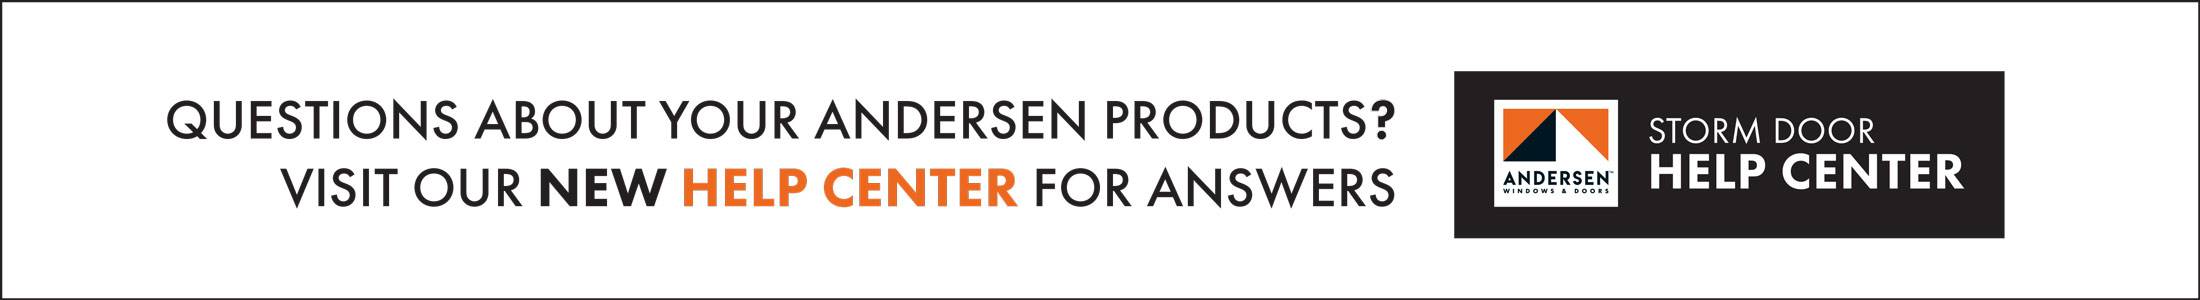 Questions about your Andersen product? Visit our new Help Center for answers.